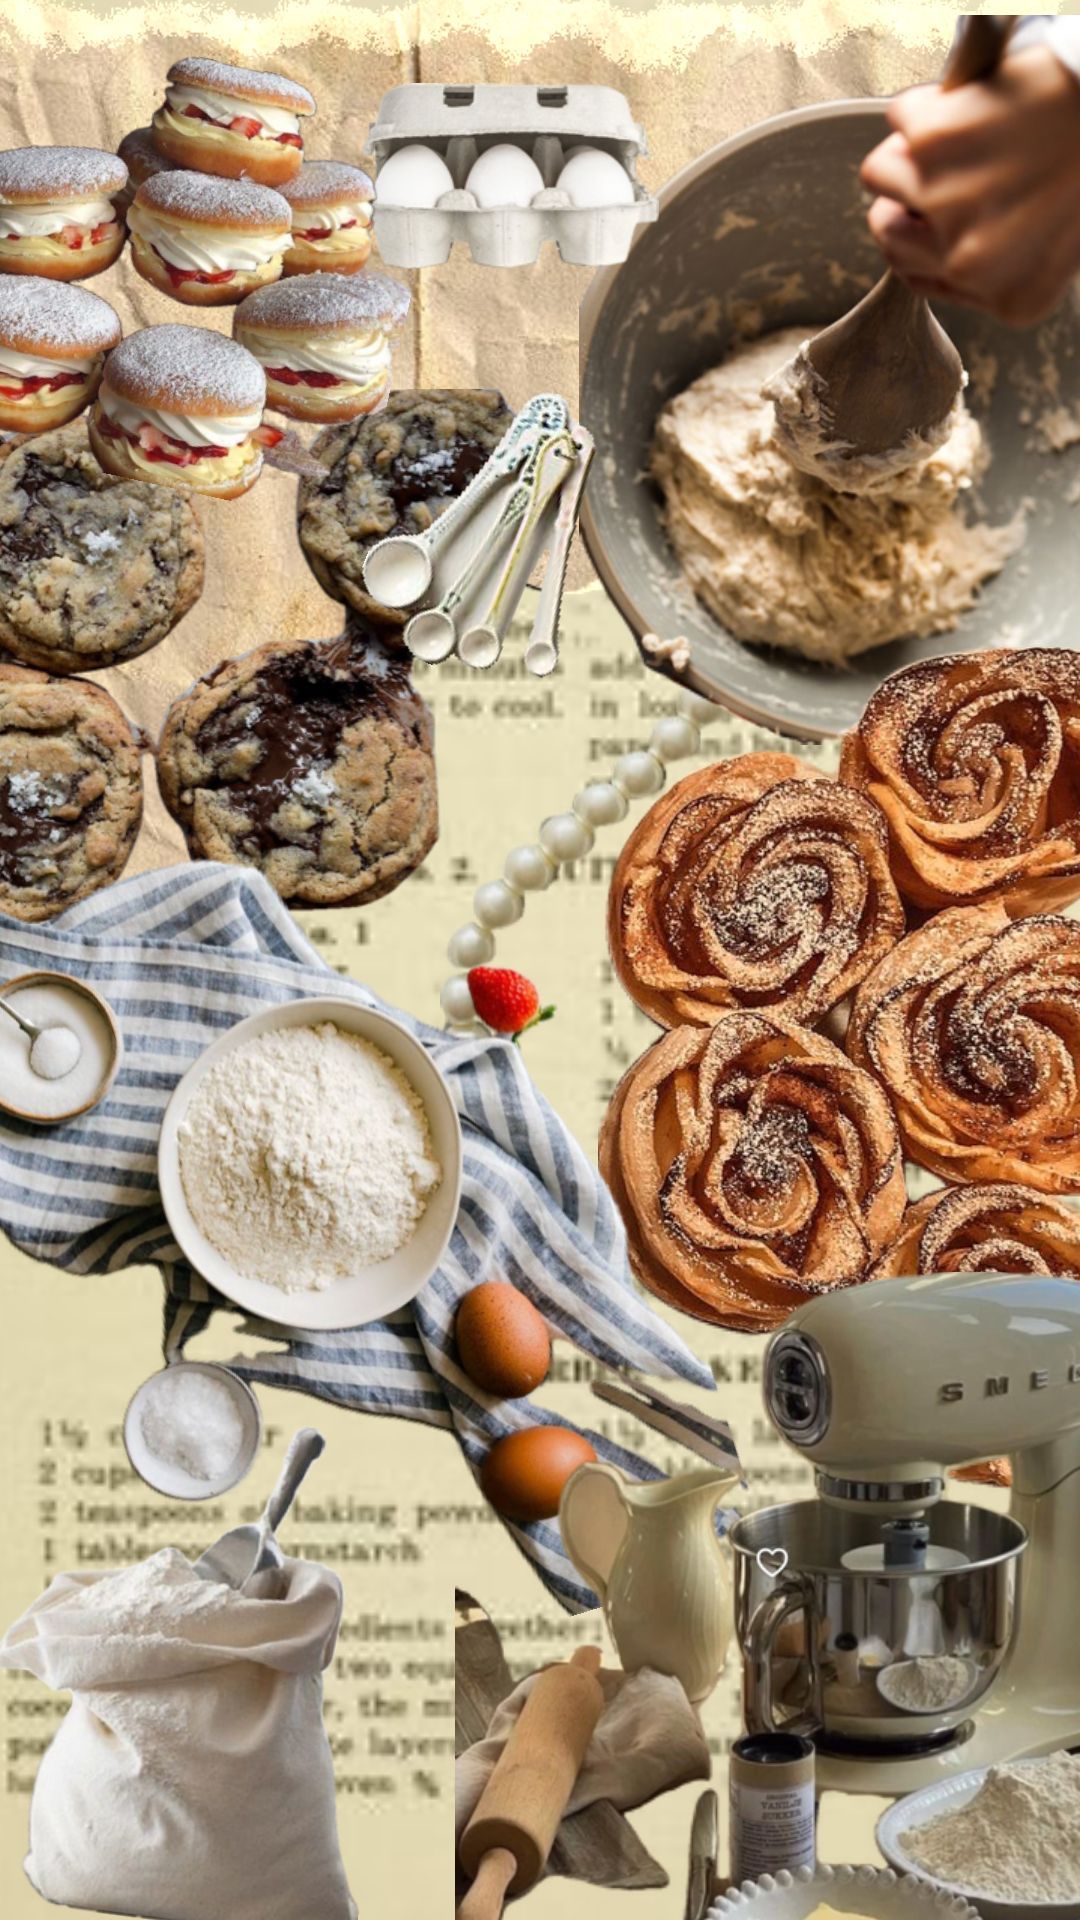 A collage of baking goods and utensils including cinnamon rolls, donuts, and a mixer. - Bakery